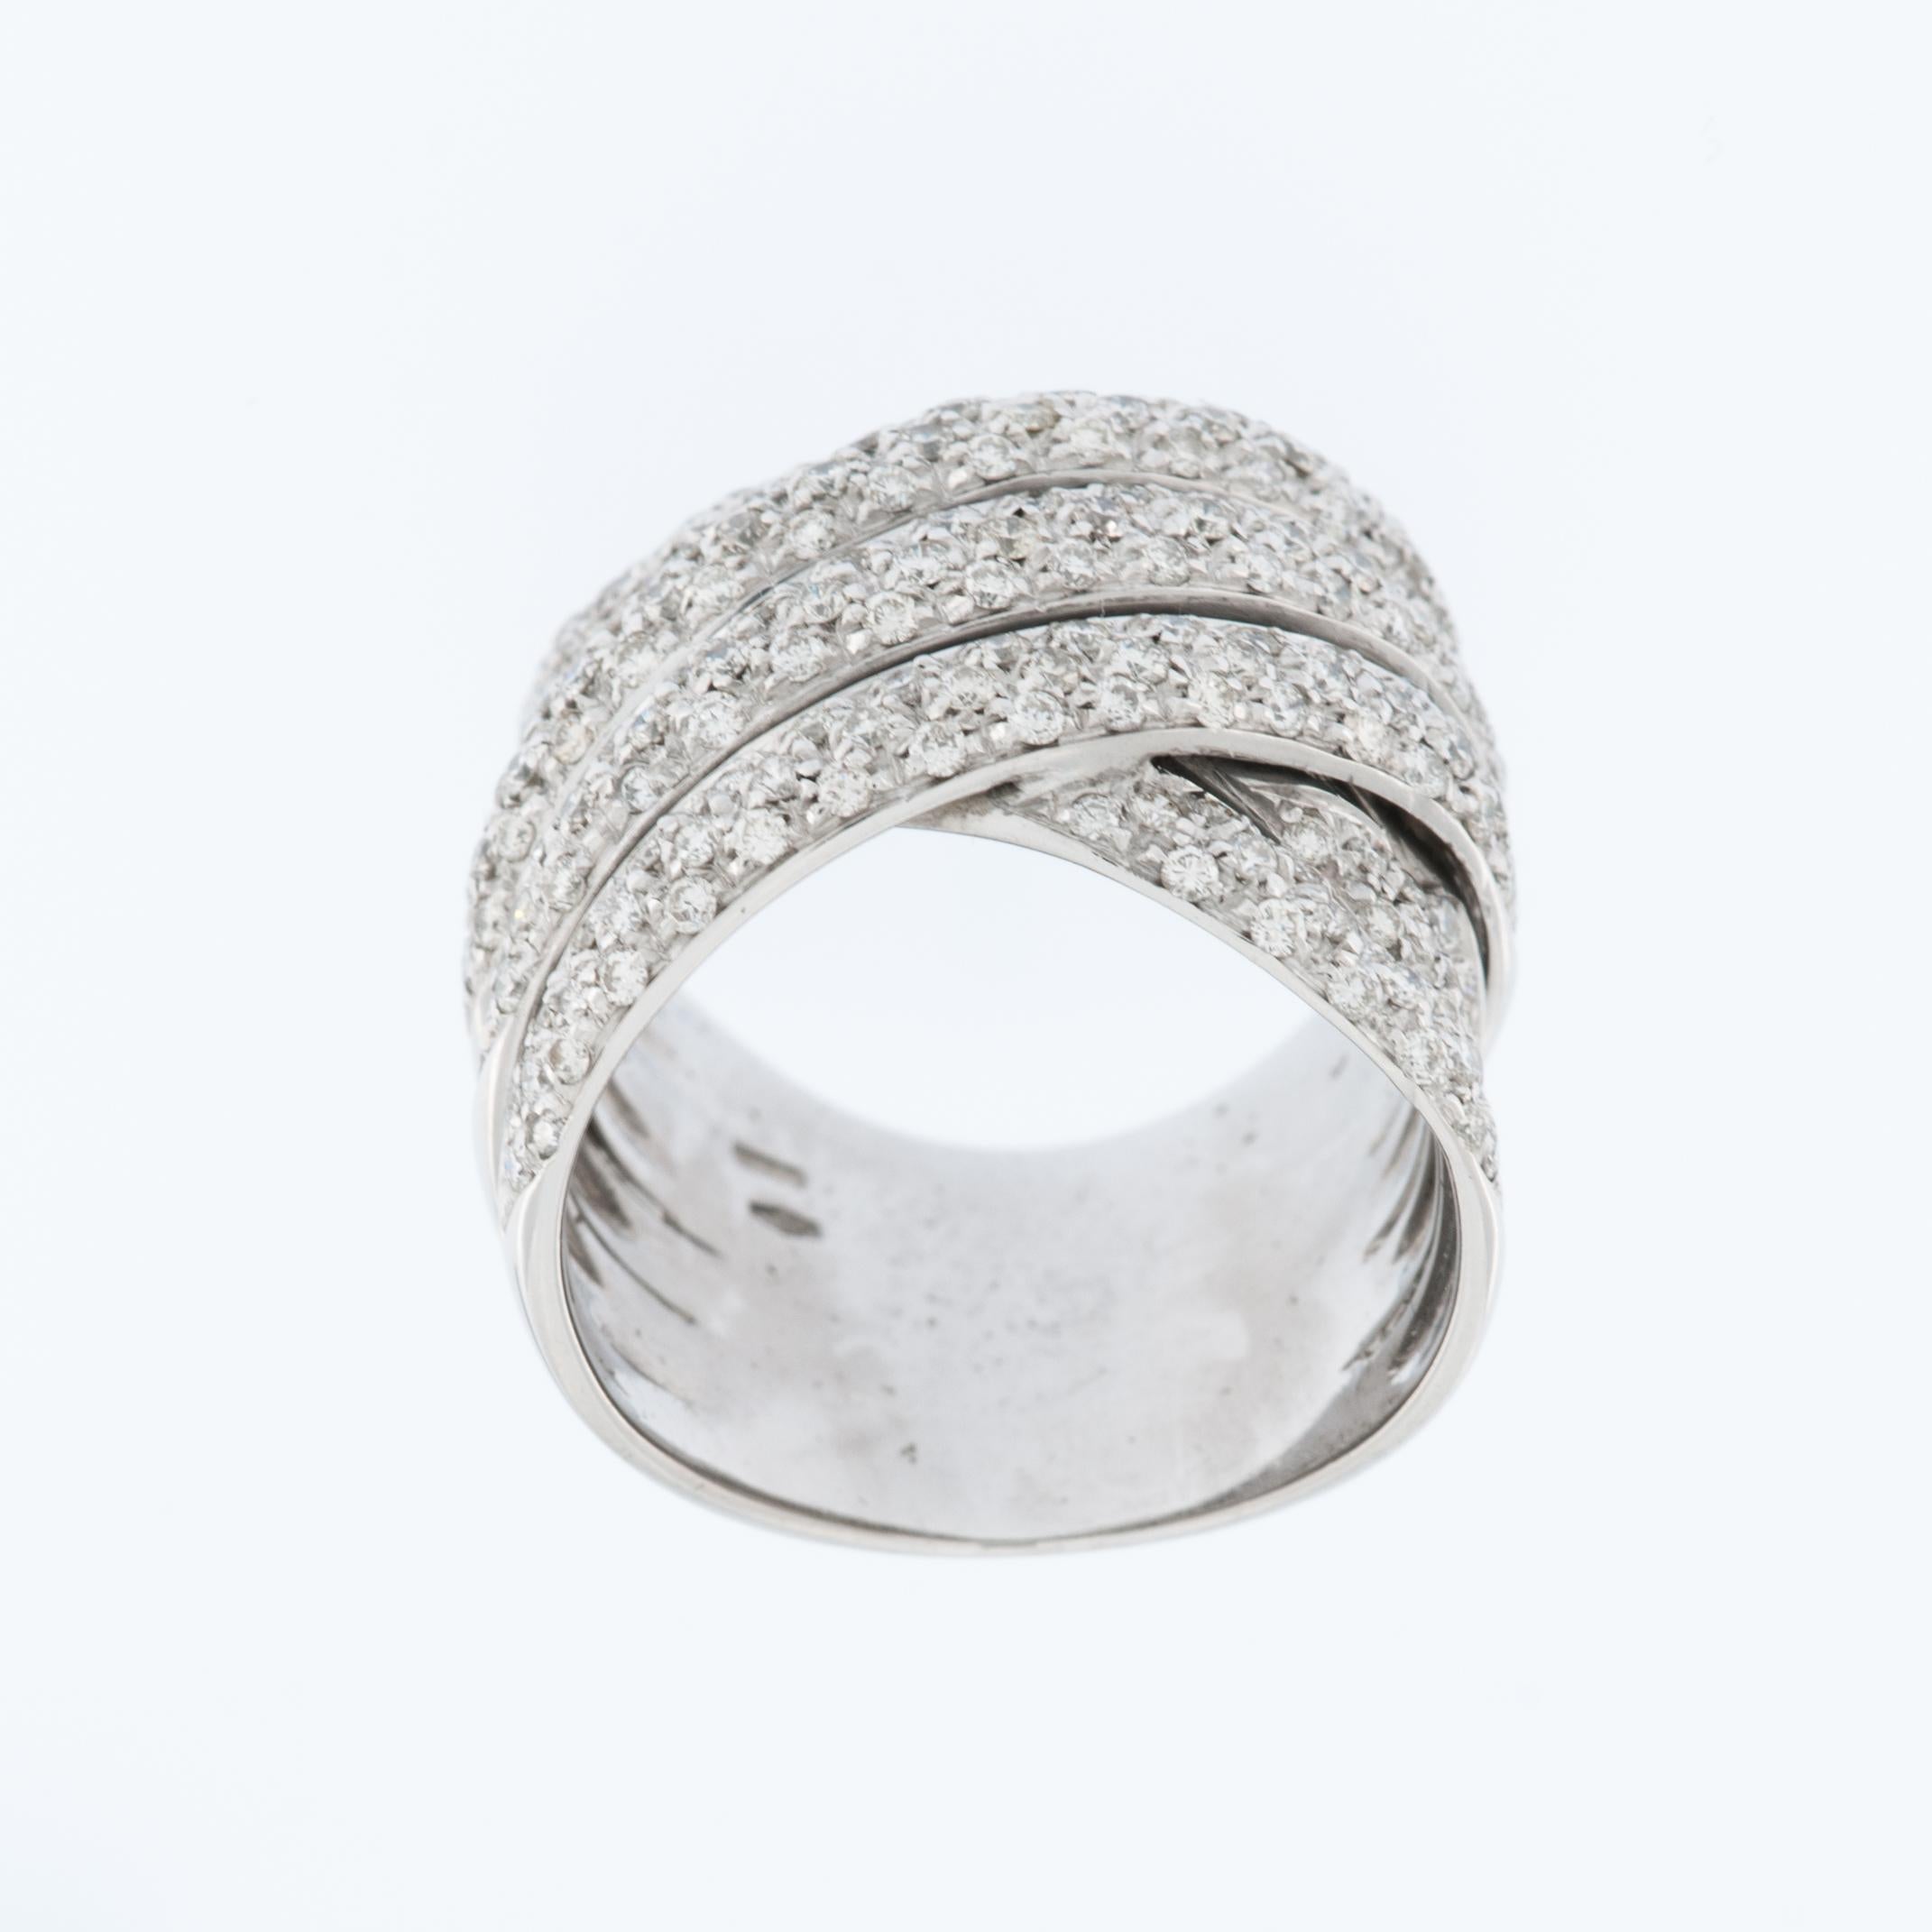 The Italian diamond ring features an 18kt white gold crossover bands with a bead setting. This design entirely in white gold, creates a unique and modern look.

The crossover band style typically involves two or more bands that intertwine or cross